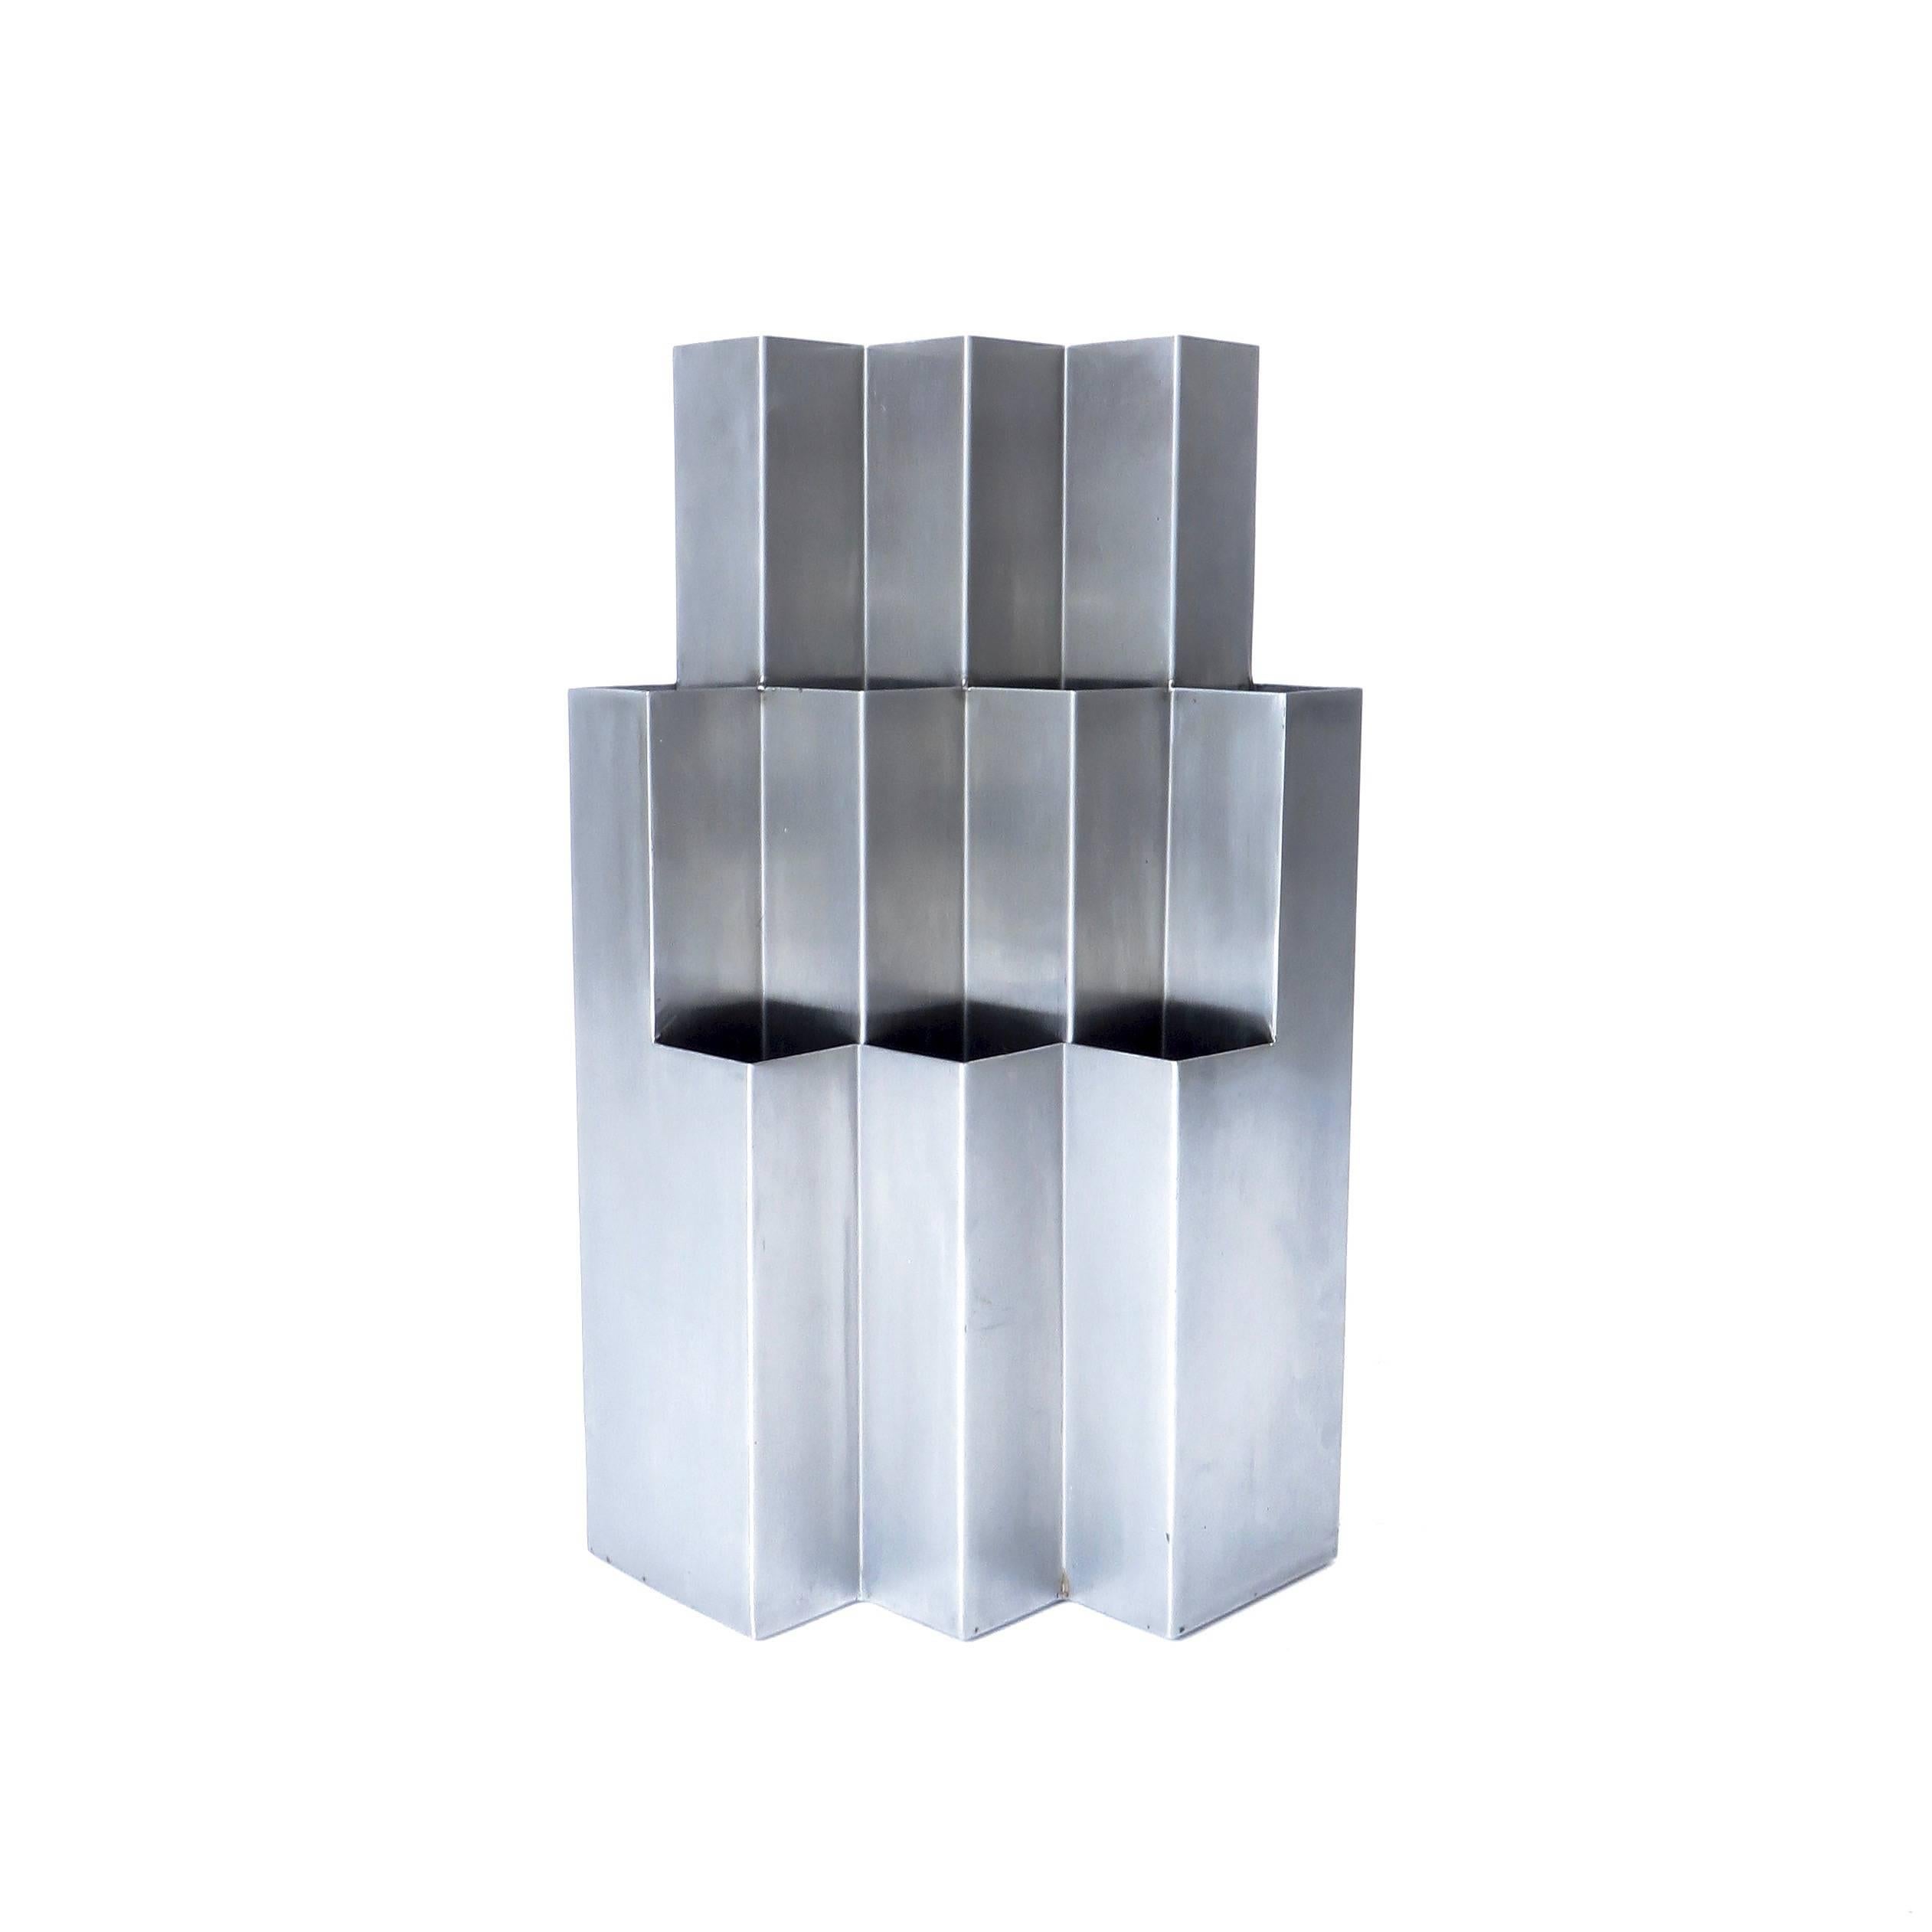 A French, circa 1970s stainless steel jardinière or umbrella holder that is more sculpture than function.
Attributed to Francois Monnet, France, circa 1970.
In the school of Pergay, Monnet, Boyer, Kappa Editors.